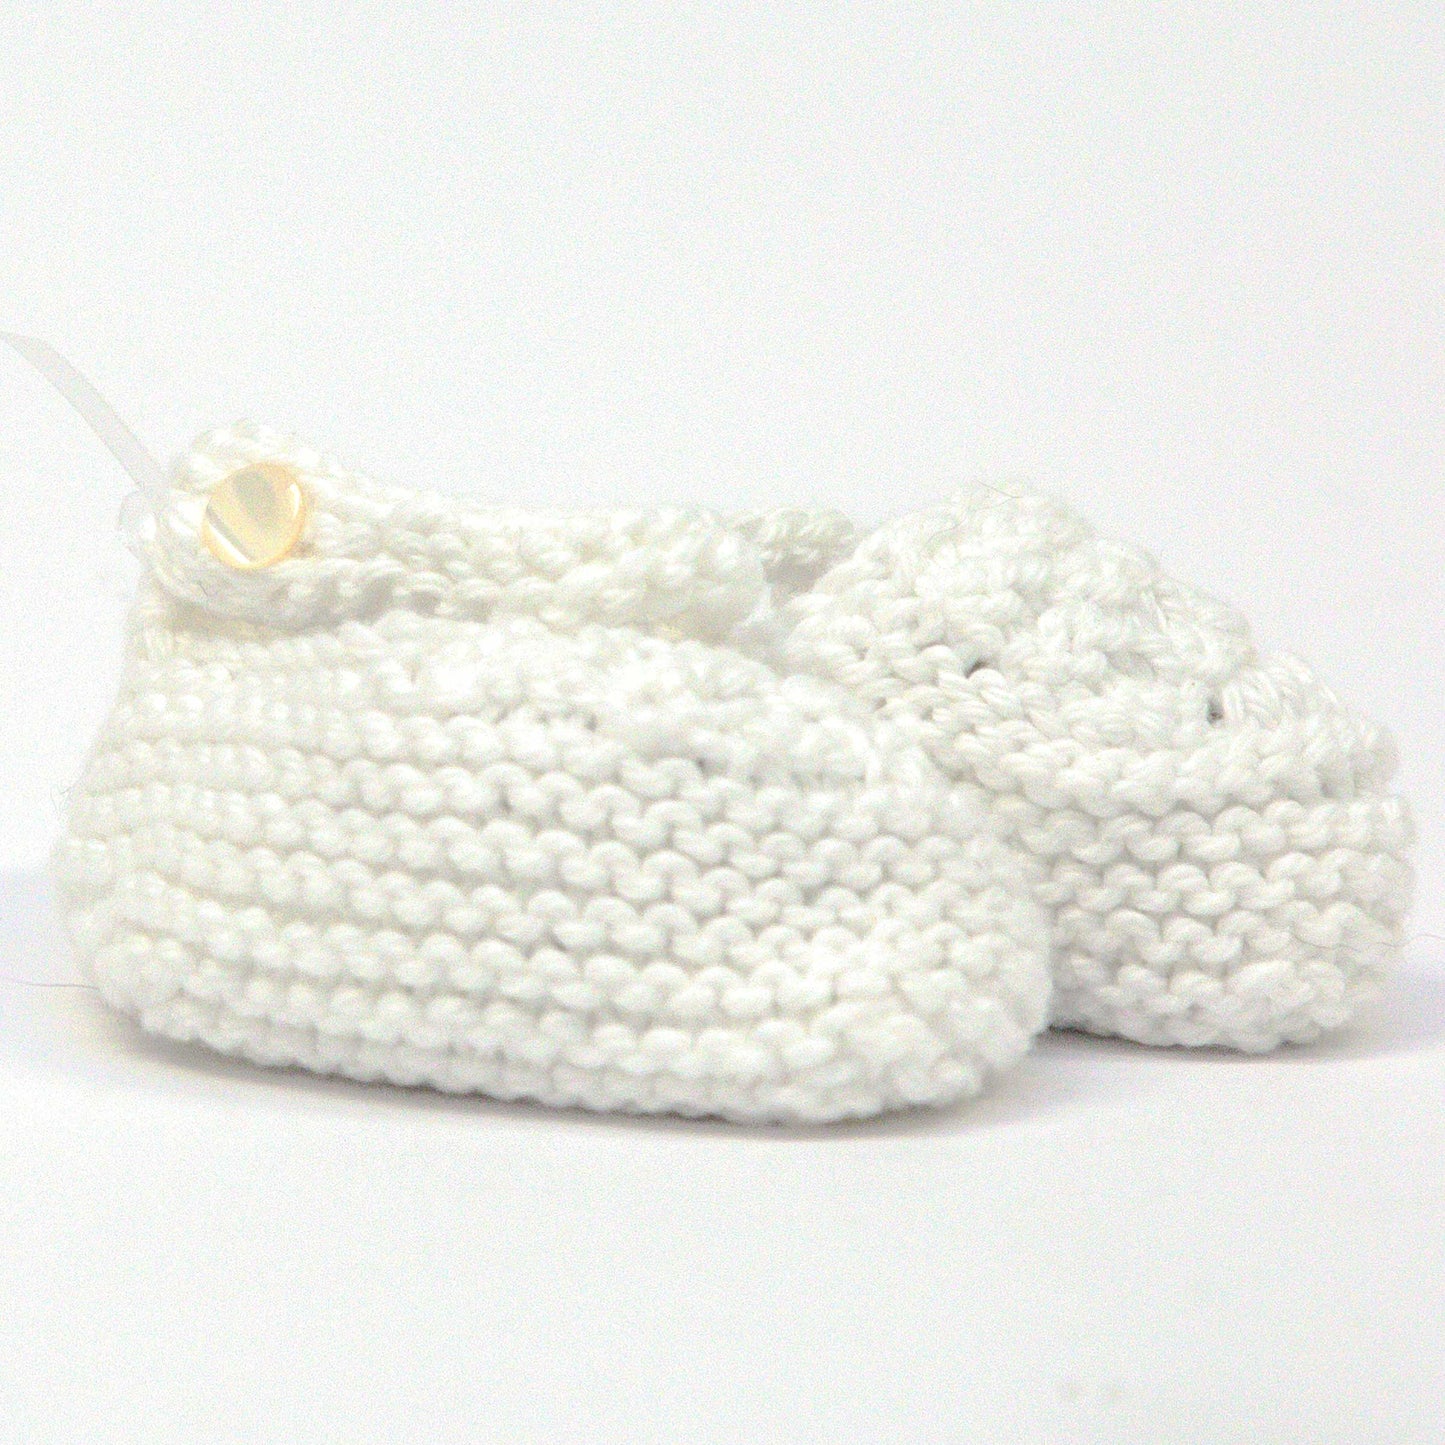 Mary Jane shoes, Hand Knit, 100% Cotton, Custo buttons, washable, White, White Buttons